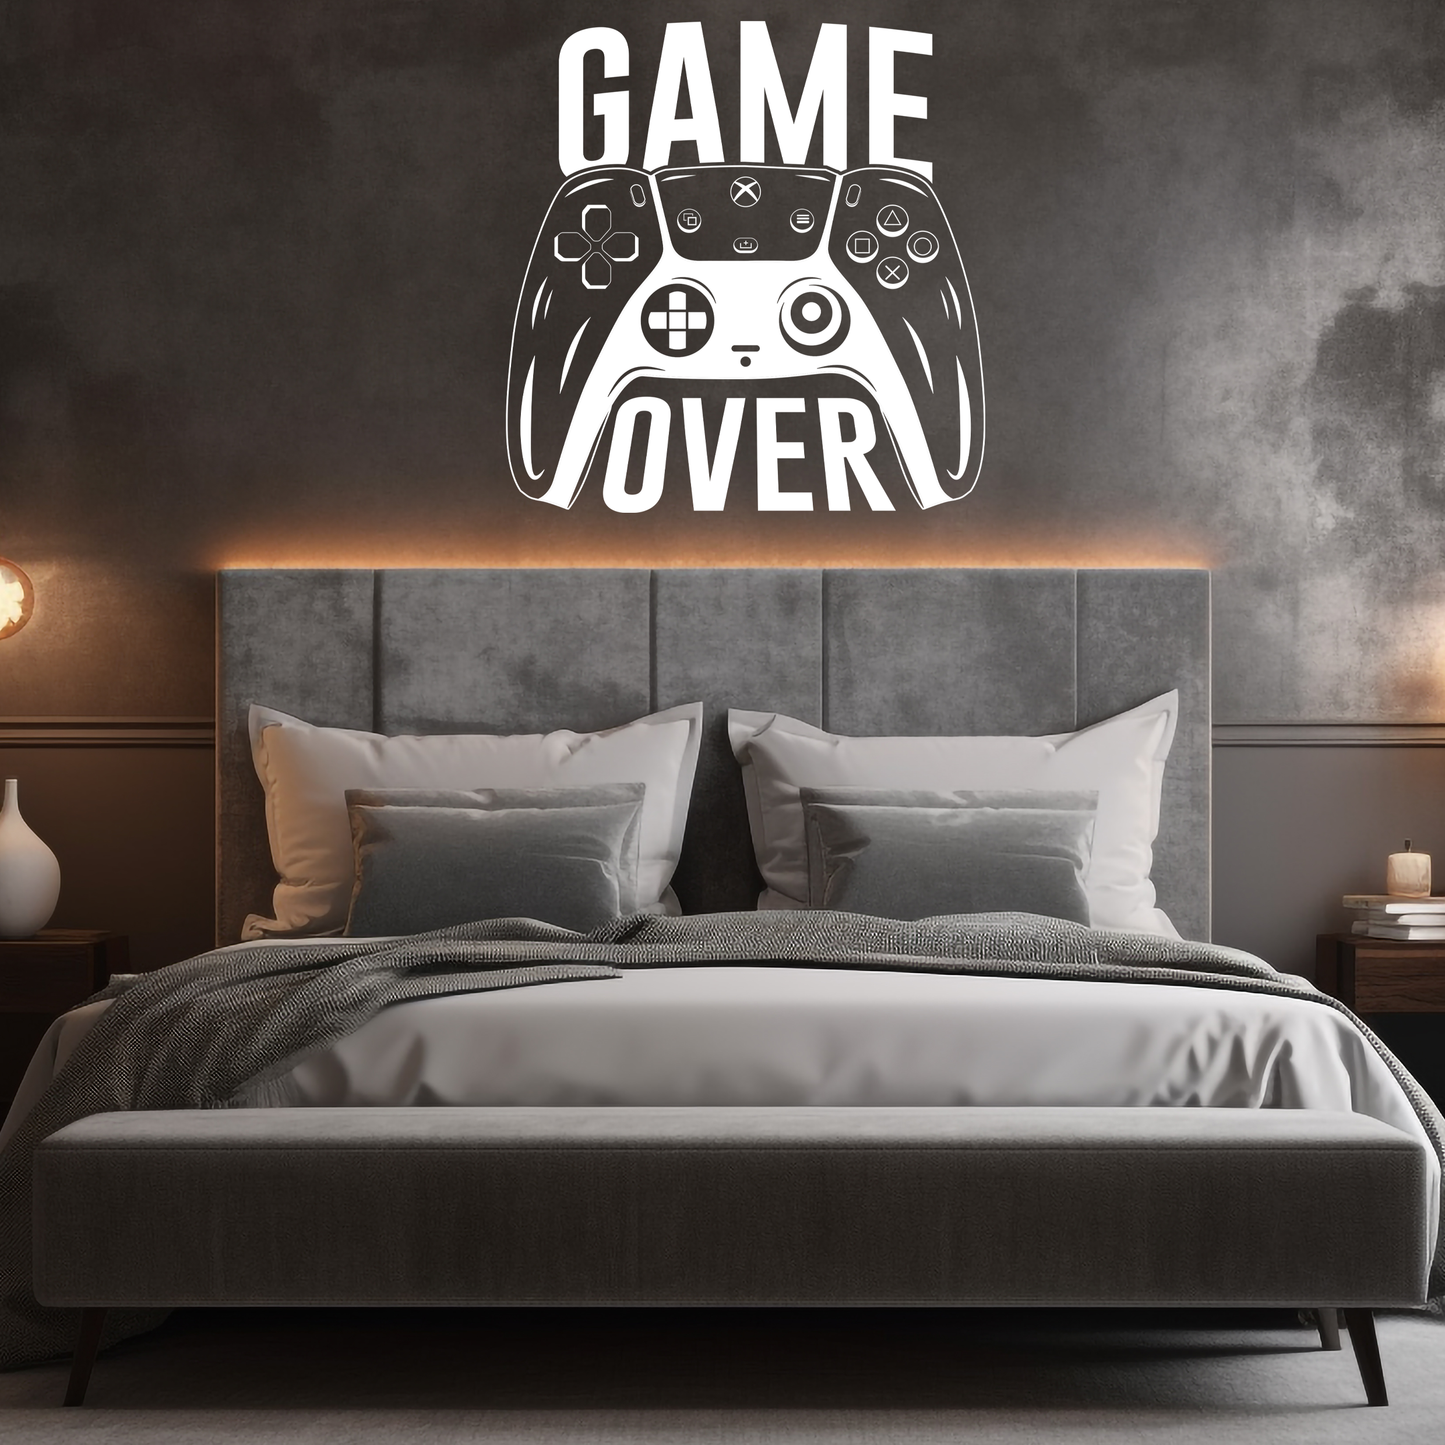 Game Over Remote Wall Sticker Decal